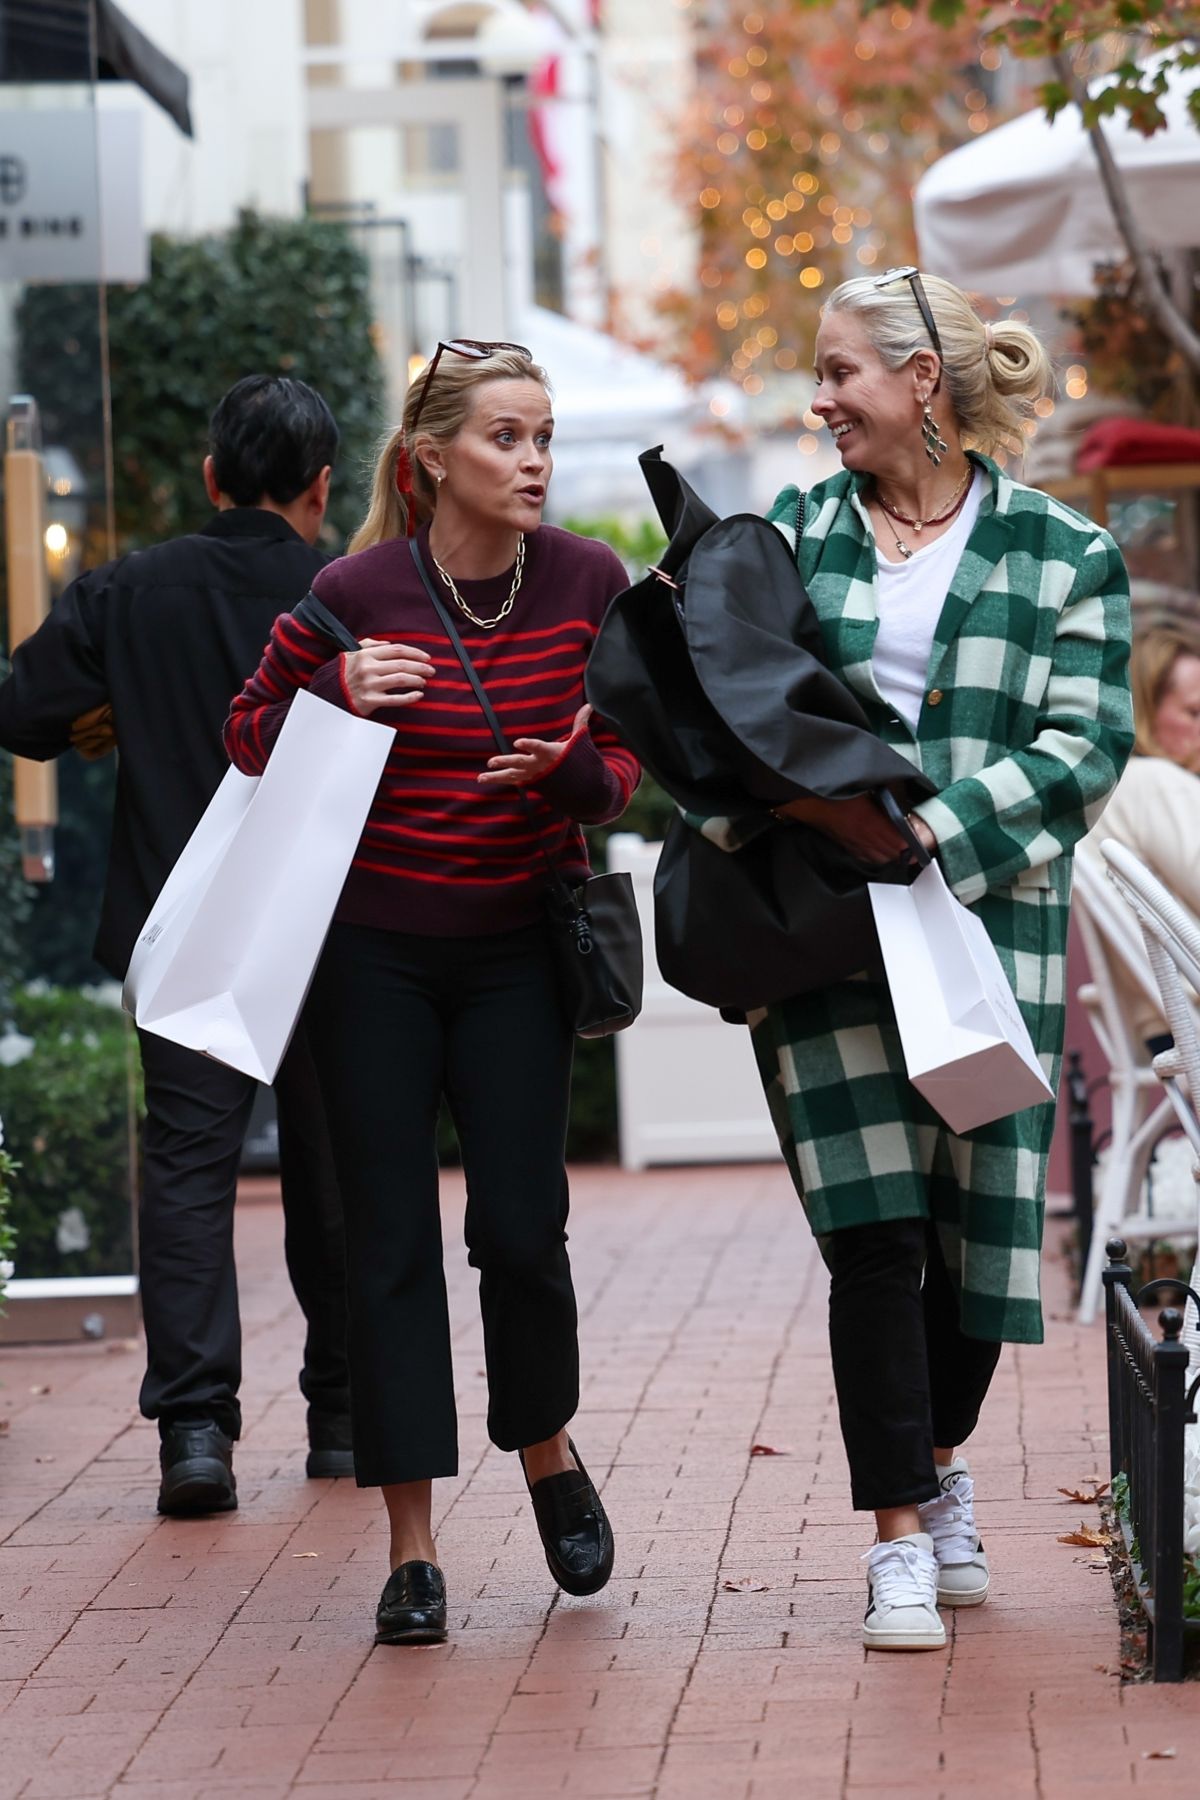 Reese Witherspoon in Pacific Palisades Mall Outing 1